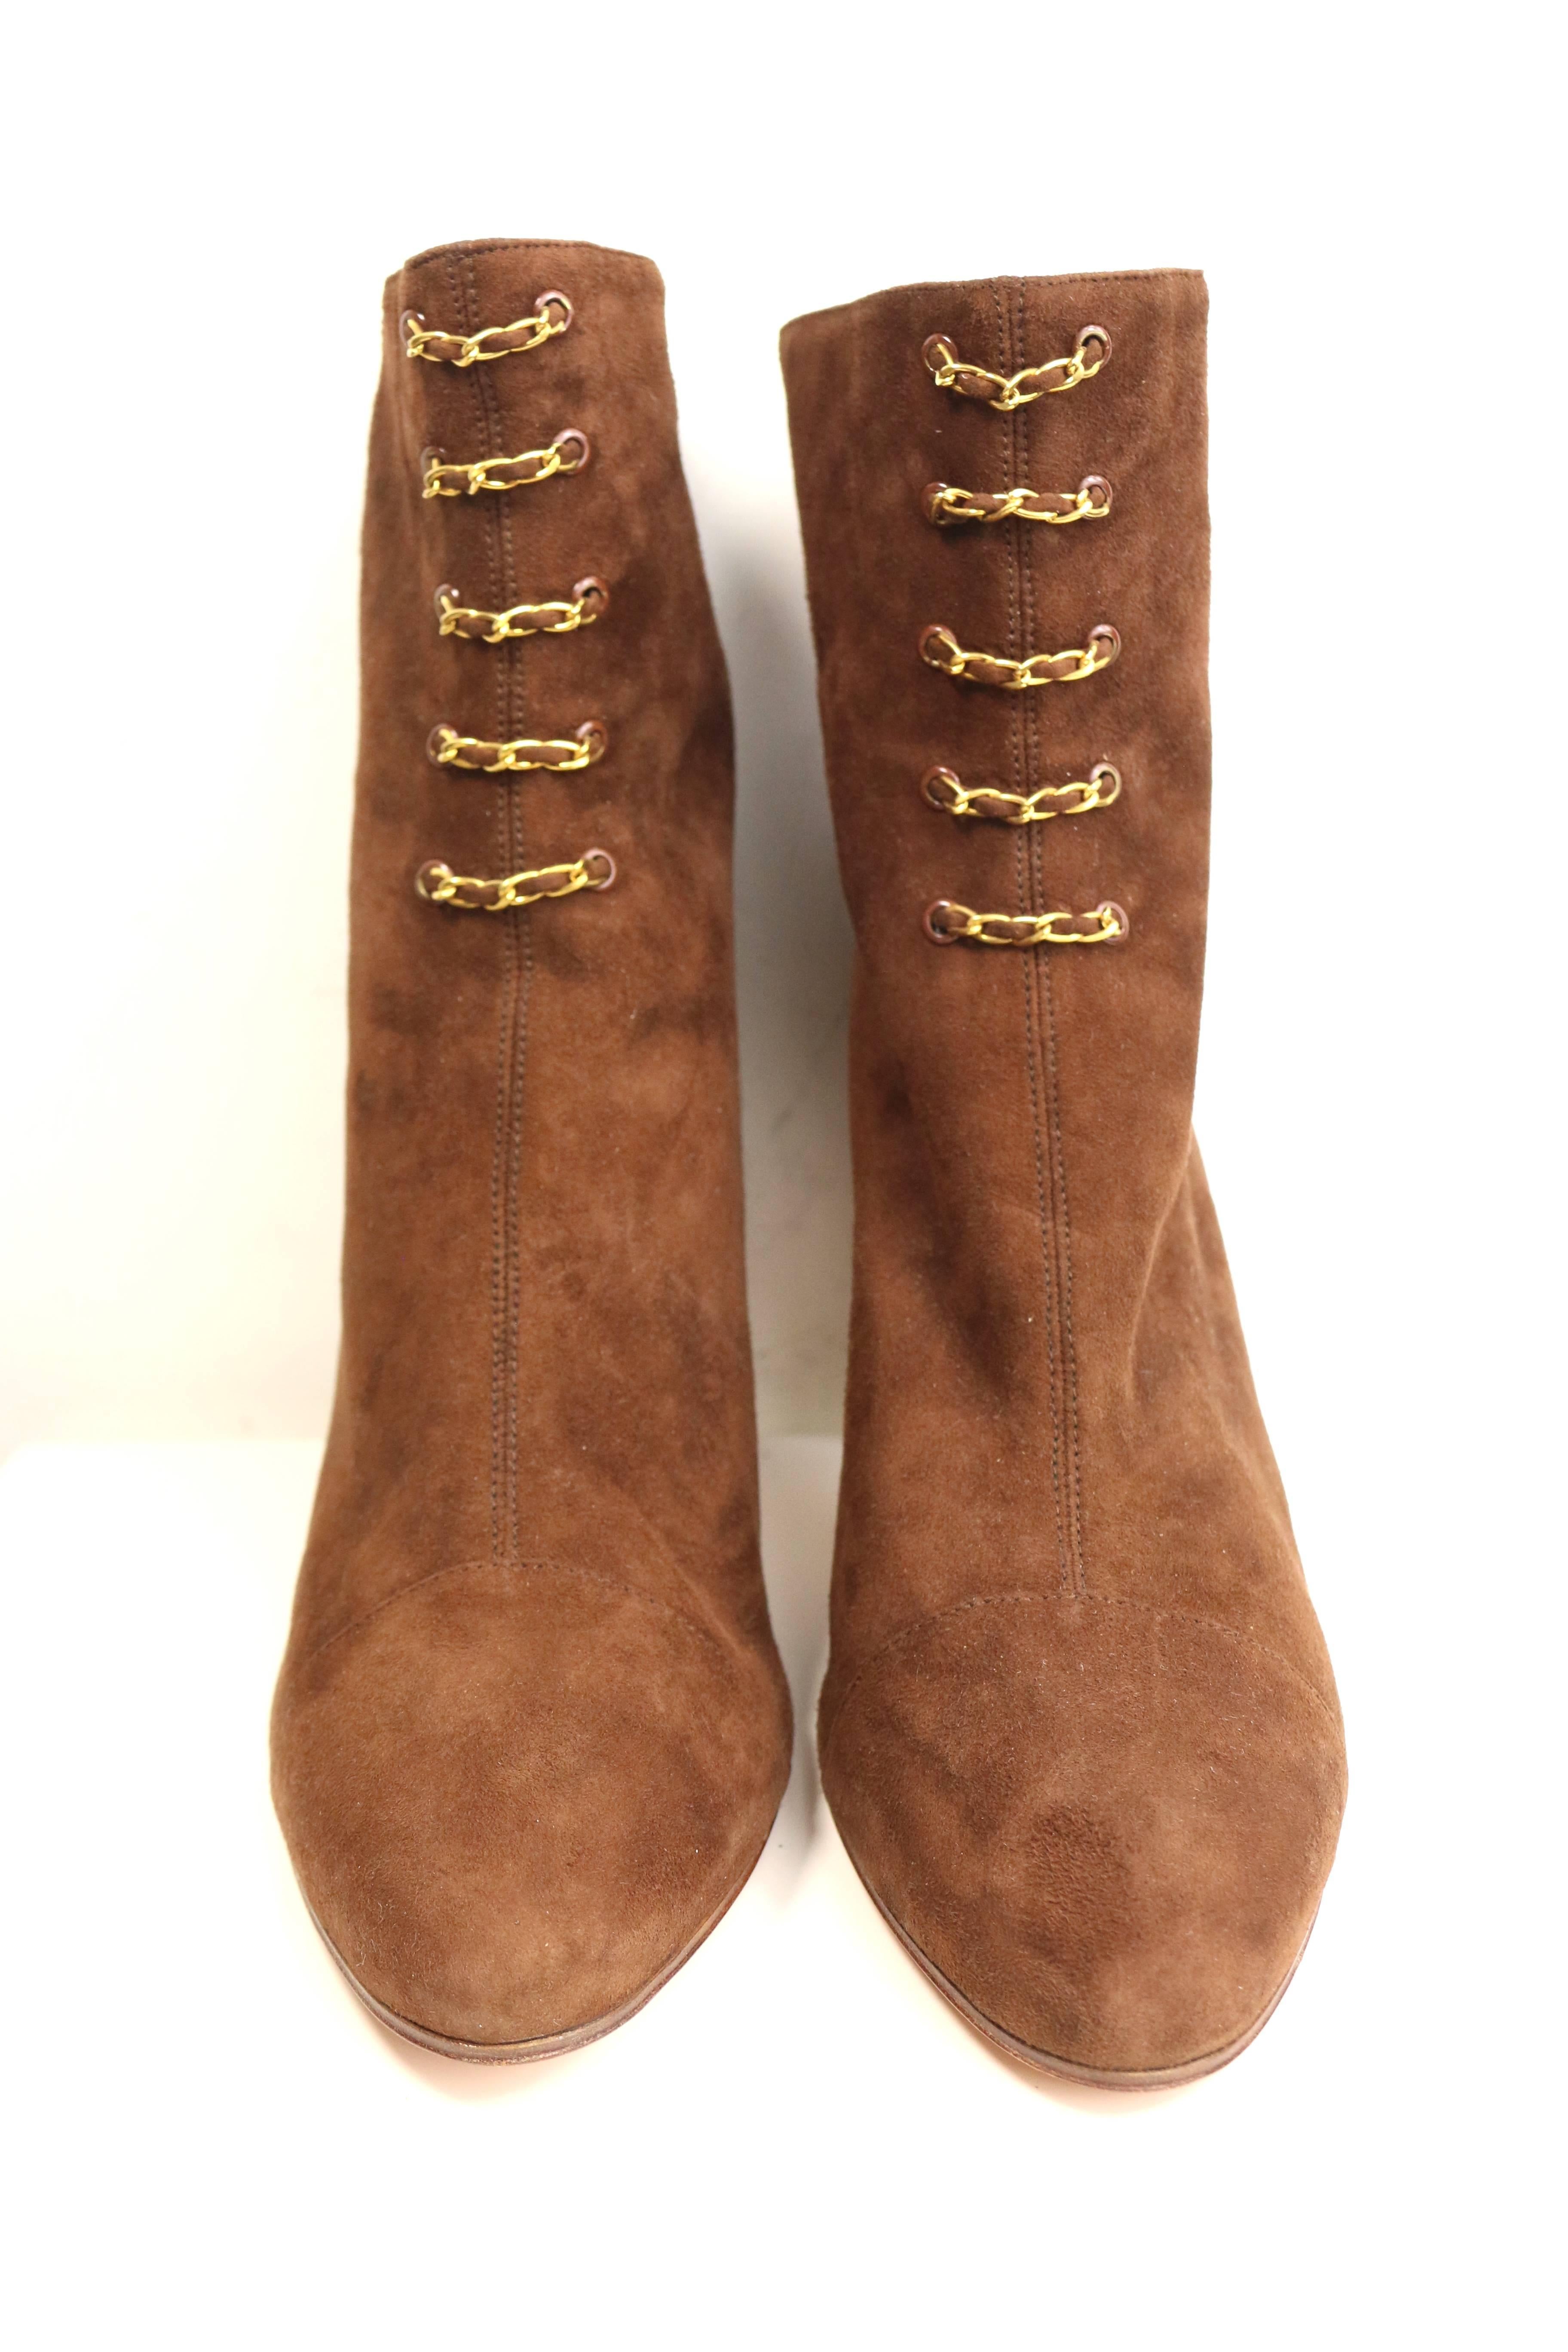 - Vintage 90s Chanel brown suede gold chain panel ankle boots. 

- Decorative front panel gold chain detail. 

- Pointy toe. 

- Back zip closure. 

- Size 37.5 
